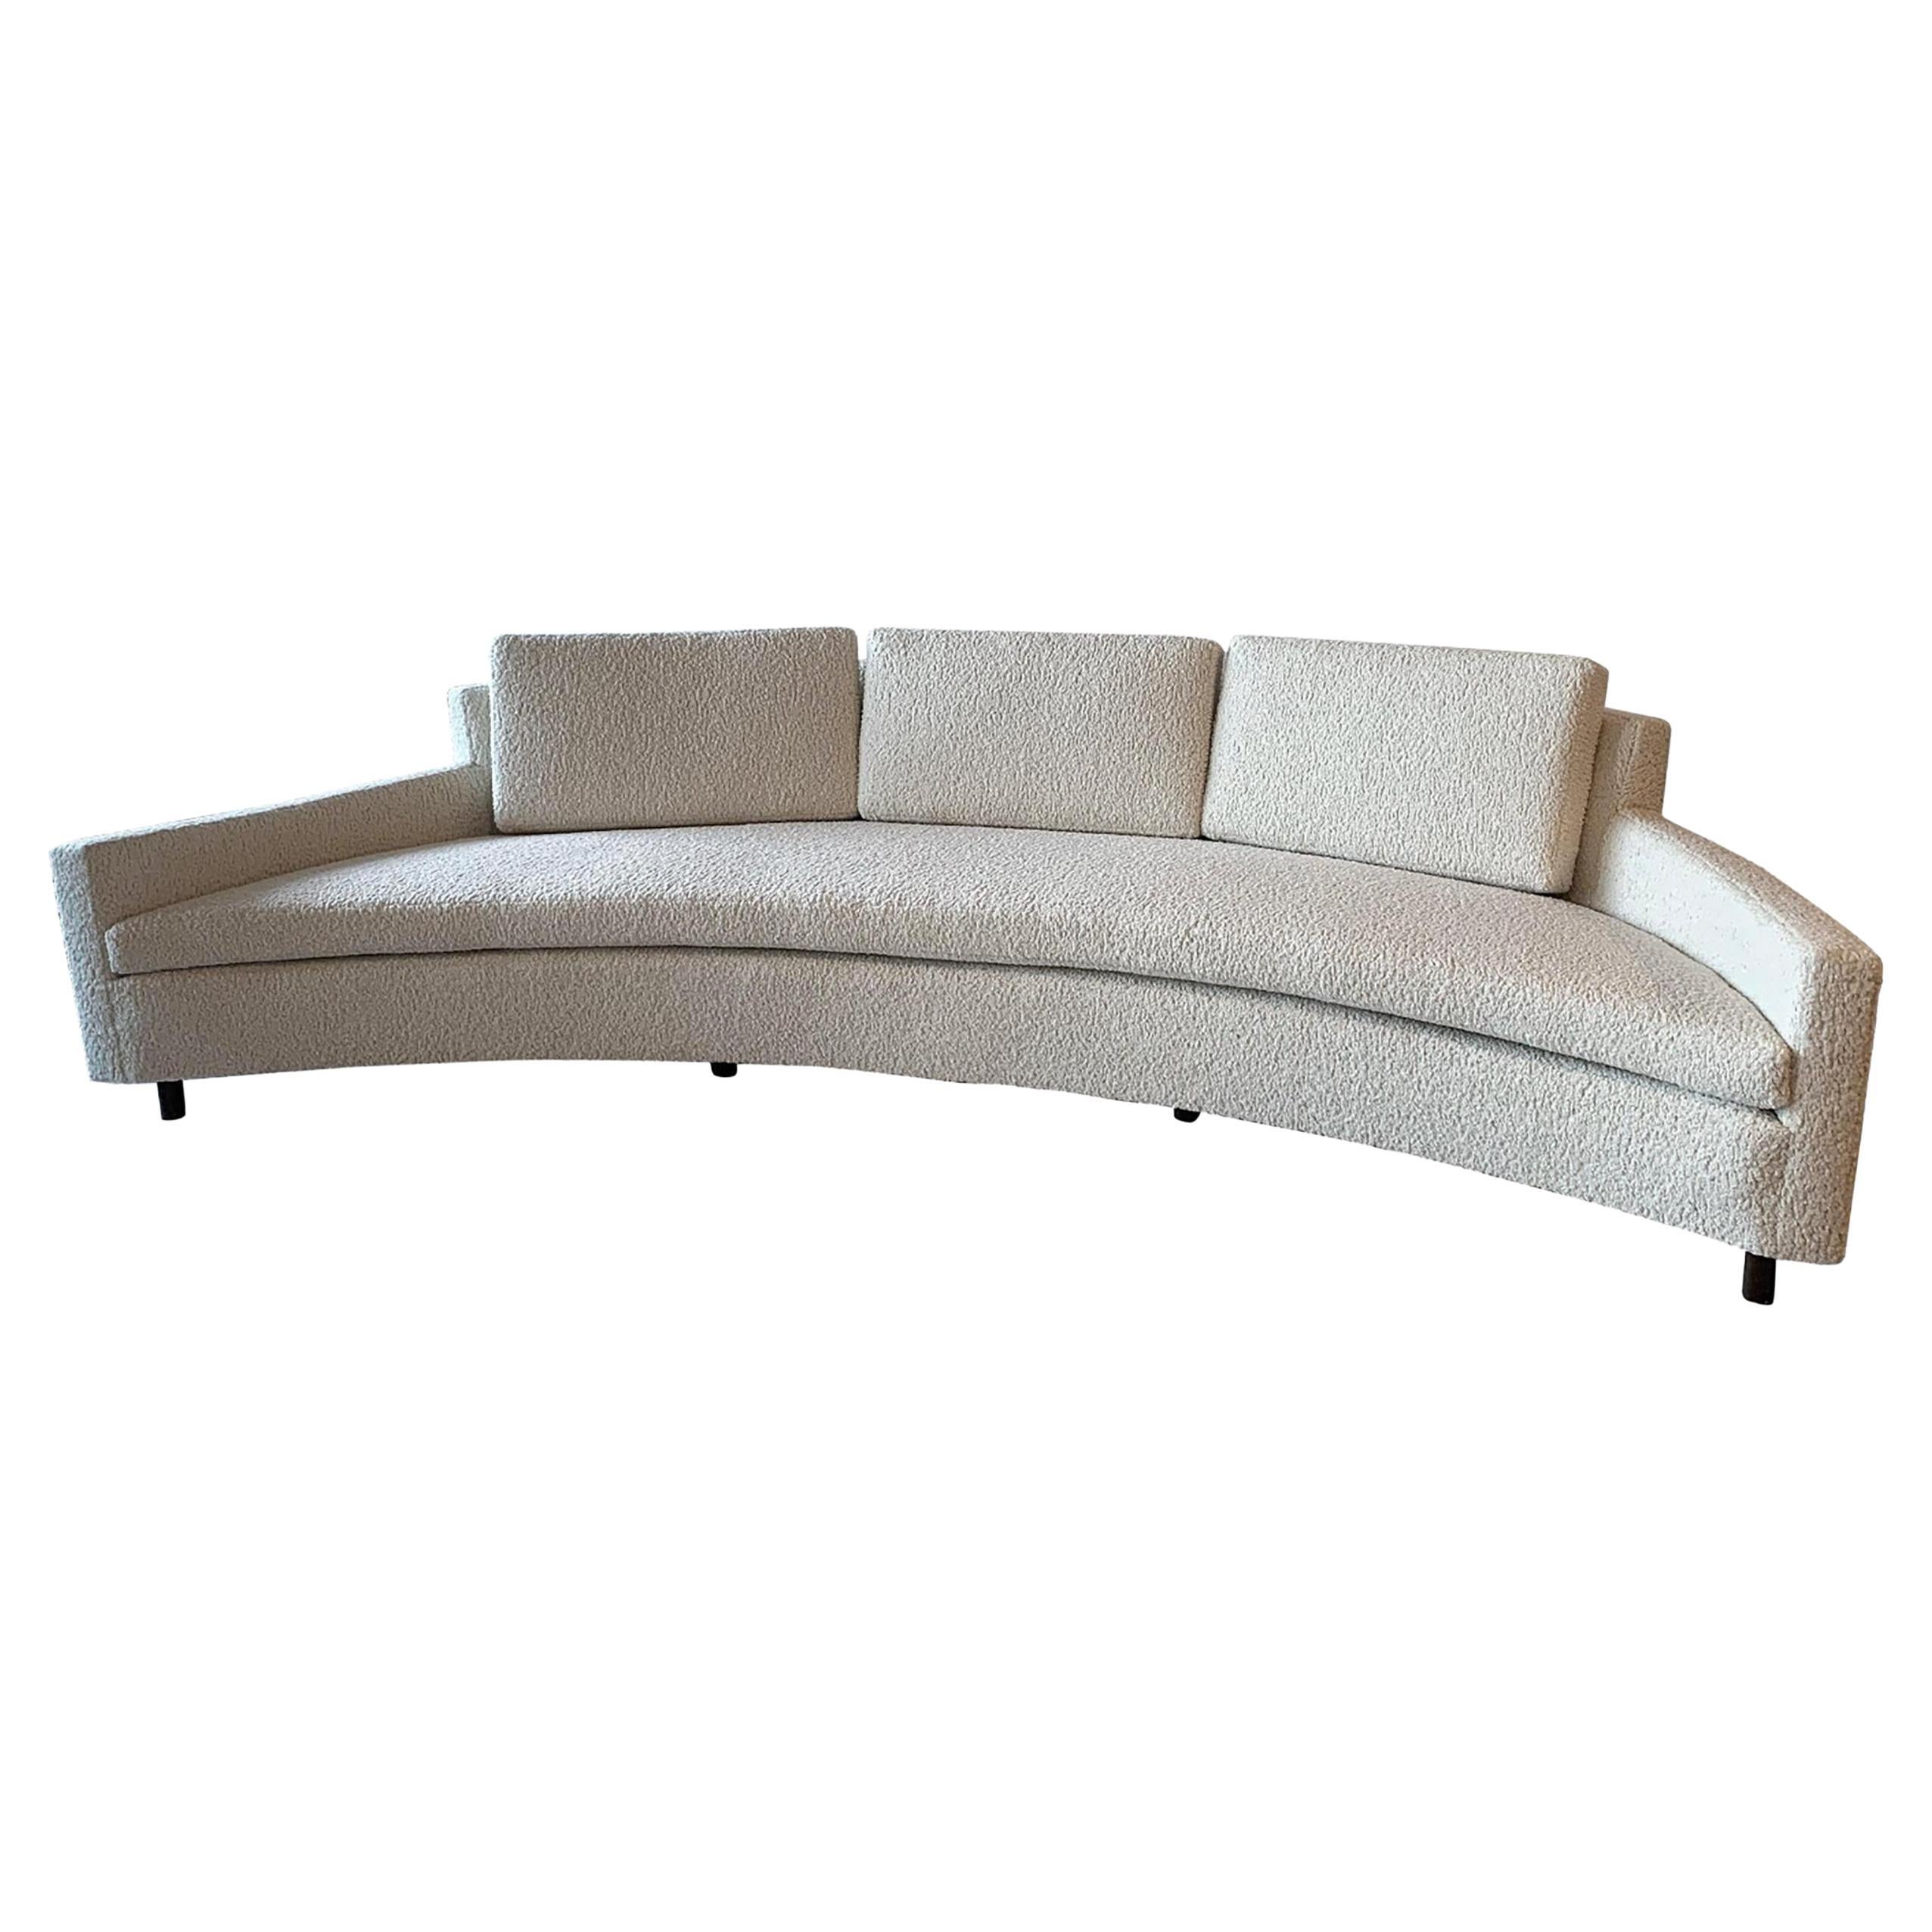 
Available right now, we have this stunning crescent sofa by design master, Harvey Probber! Picture this: You're lounging in sheer opulence on a sofa that's as curvy as the bird streets, and equally as glamorous. And guess what? We've got not one,